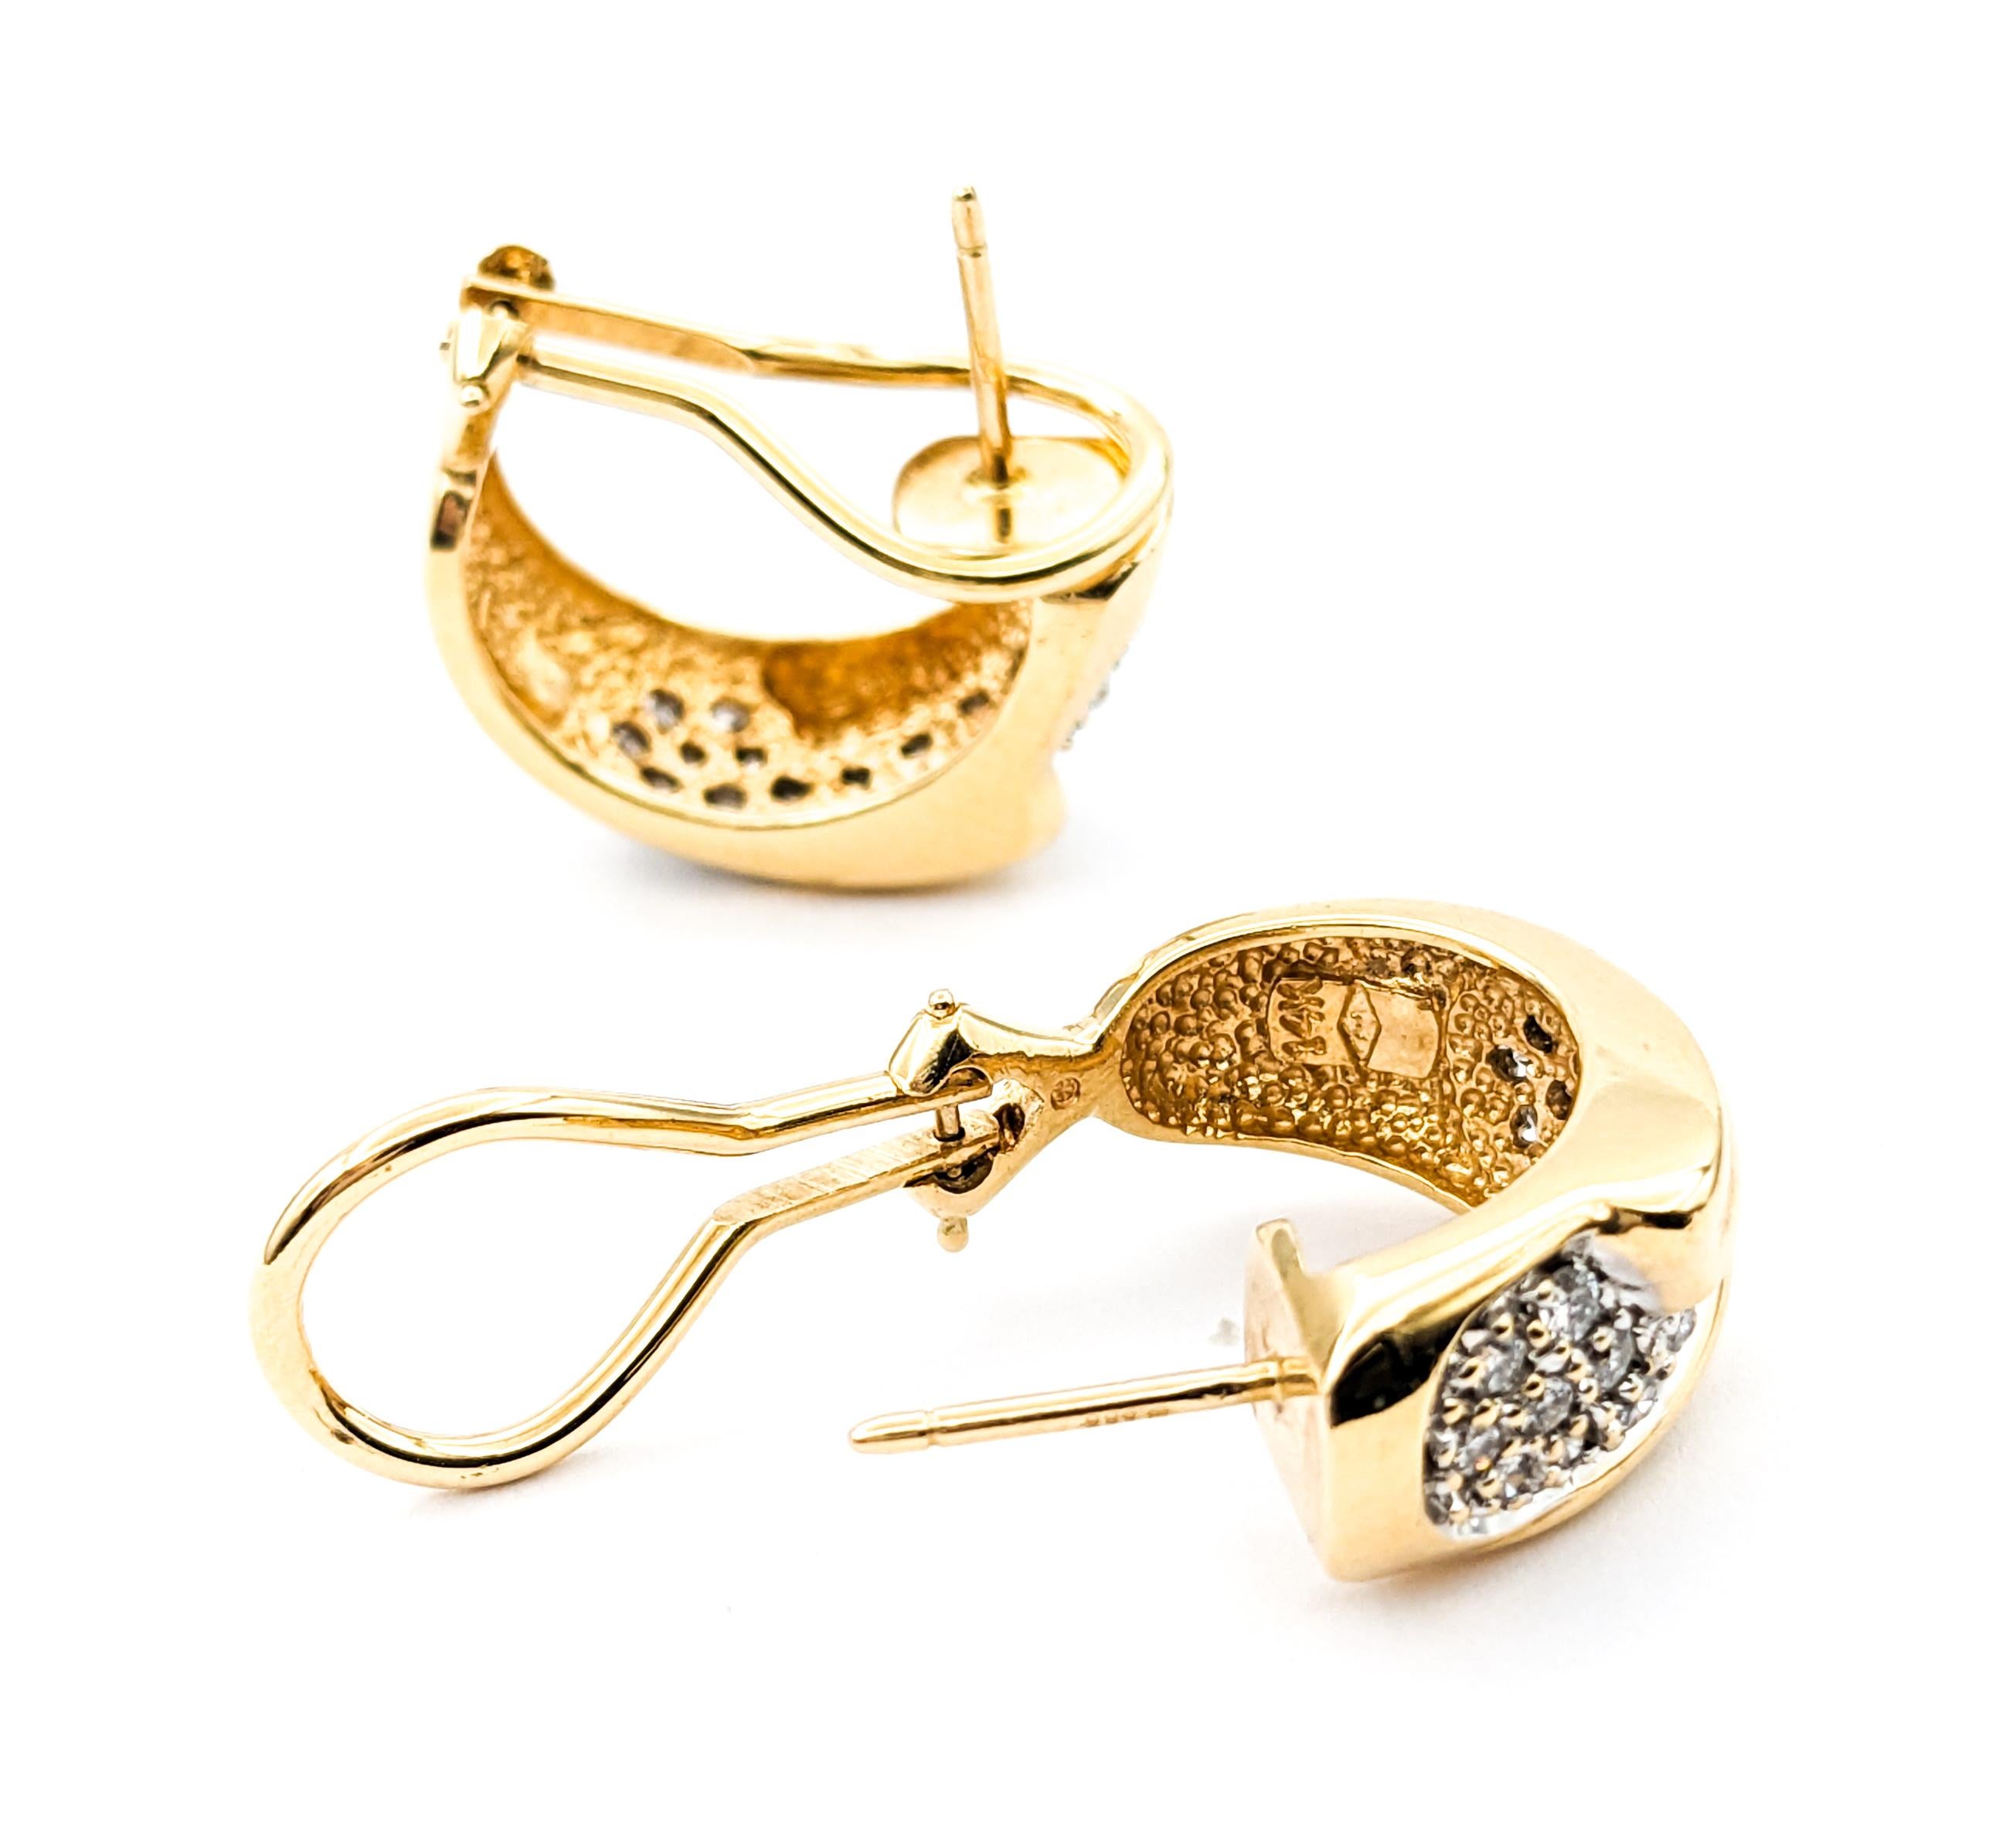 Diamond Hoop Omega Back Earrings In Yellow Gold

Introducing these luxurious pave diamond fashion earrings crafted in 14kt yellow gold. These stunning earrings feature .50ctw of round diamonds with SI clarity and a near colorless hue, set in an